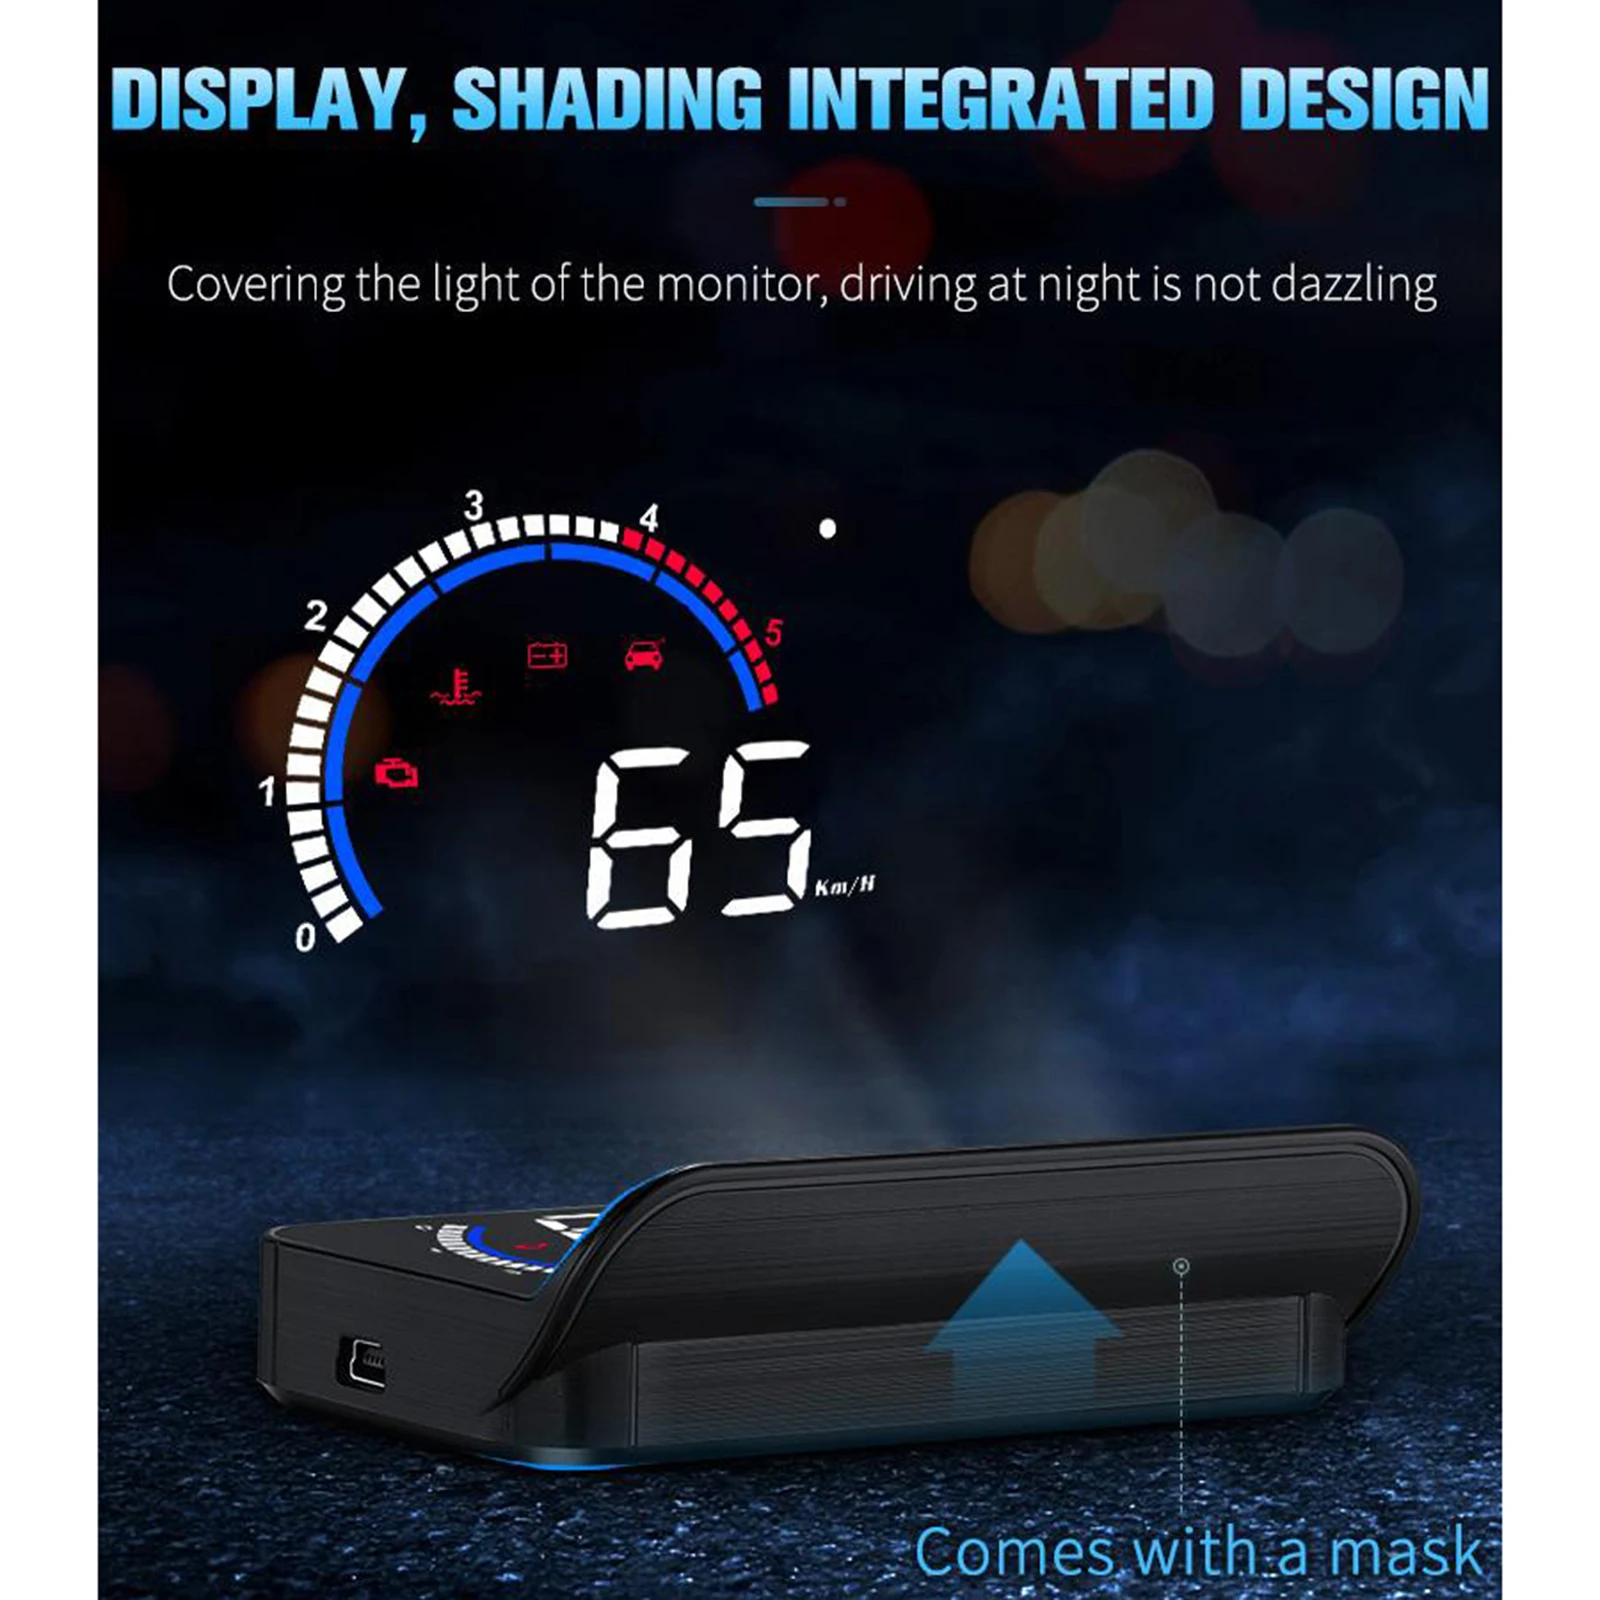 Upgrade Car Universal Head Up Display OBD2 II EUOBD HUD,Speed,Overspeed Warning,Mileage Measurement,for All Vehicles